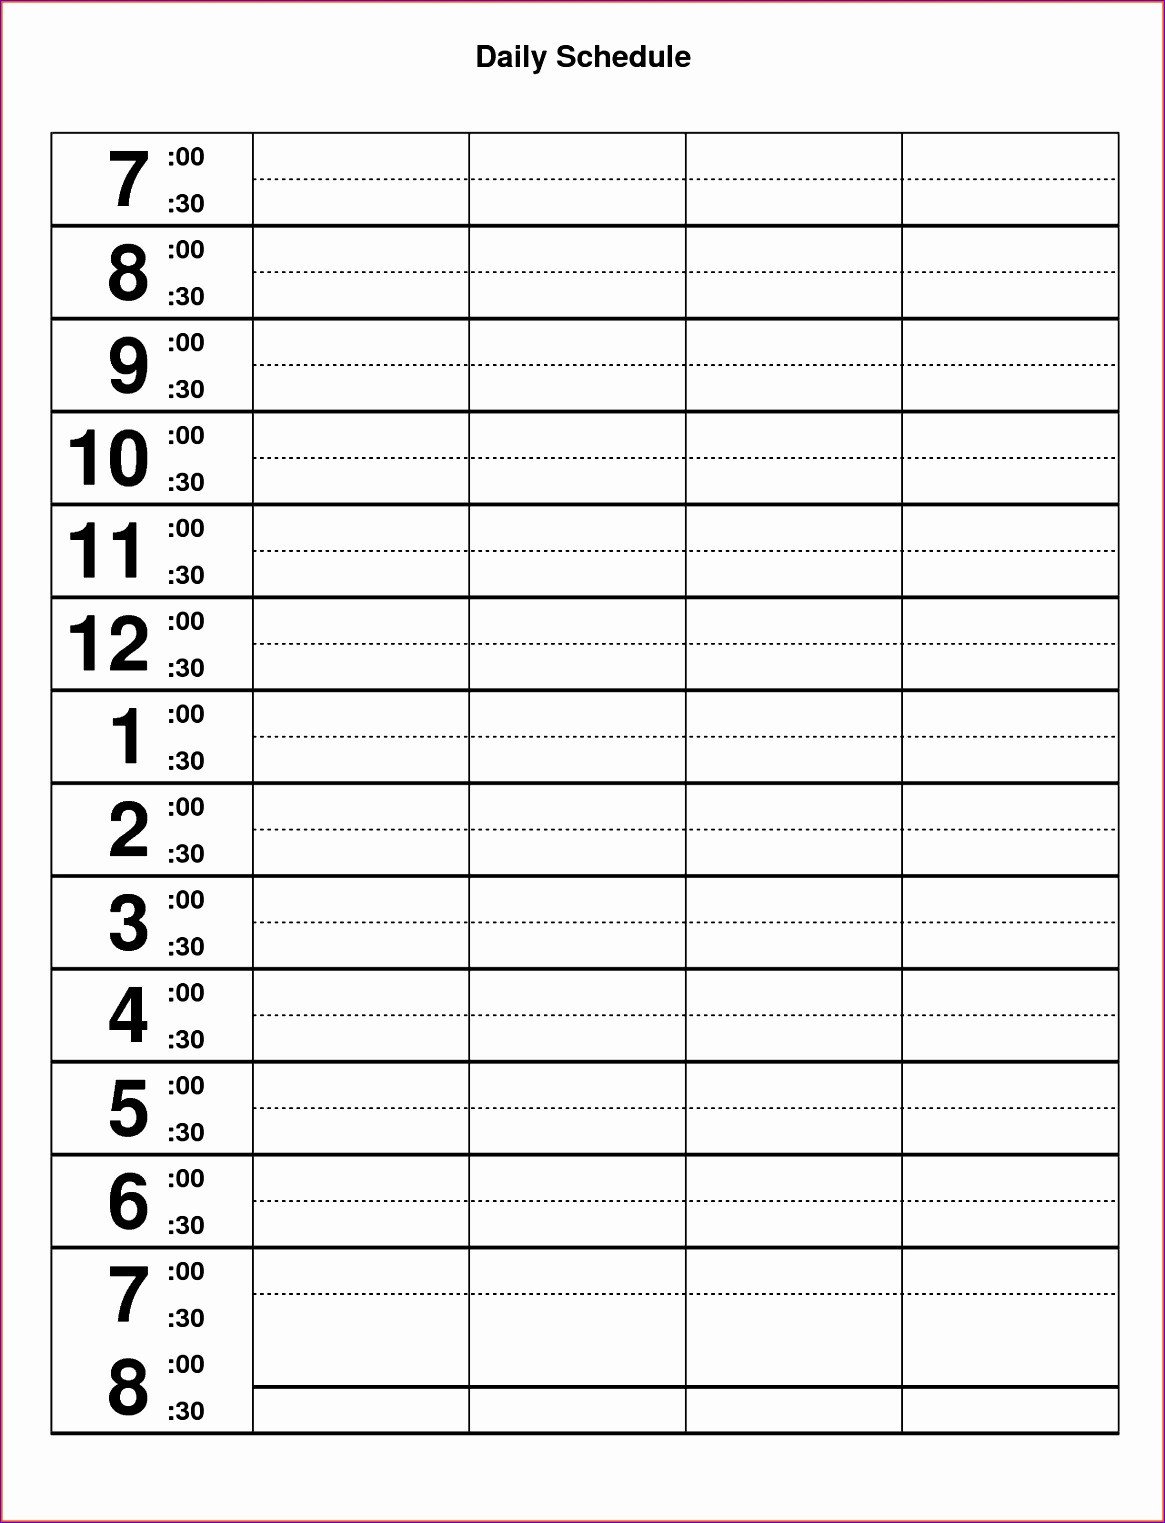 Hourly Schedule Template Excel 10 Excel Hourly Schedule Template Exceltemplates